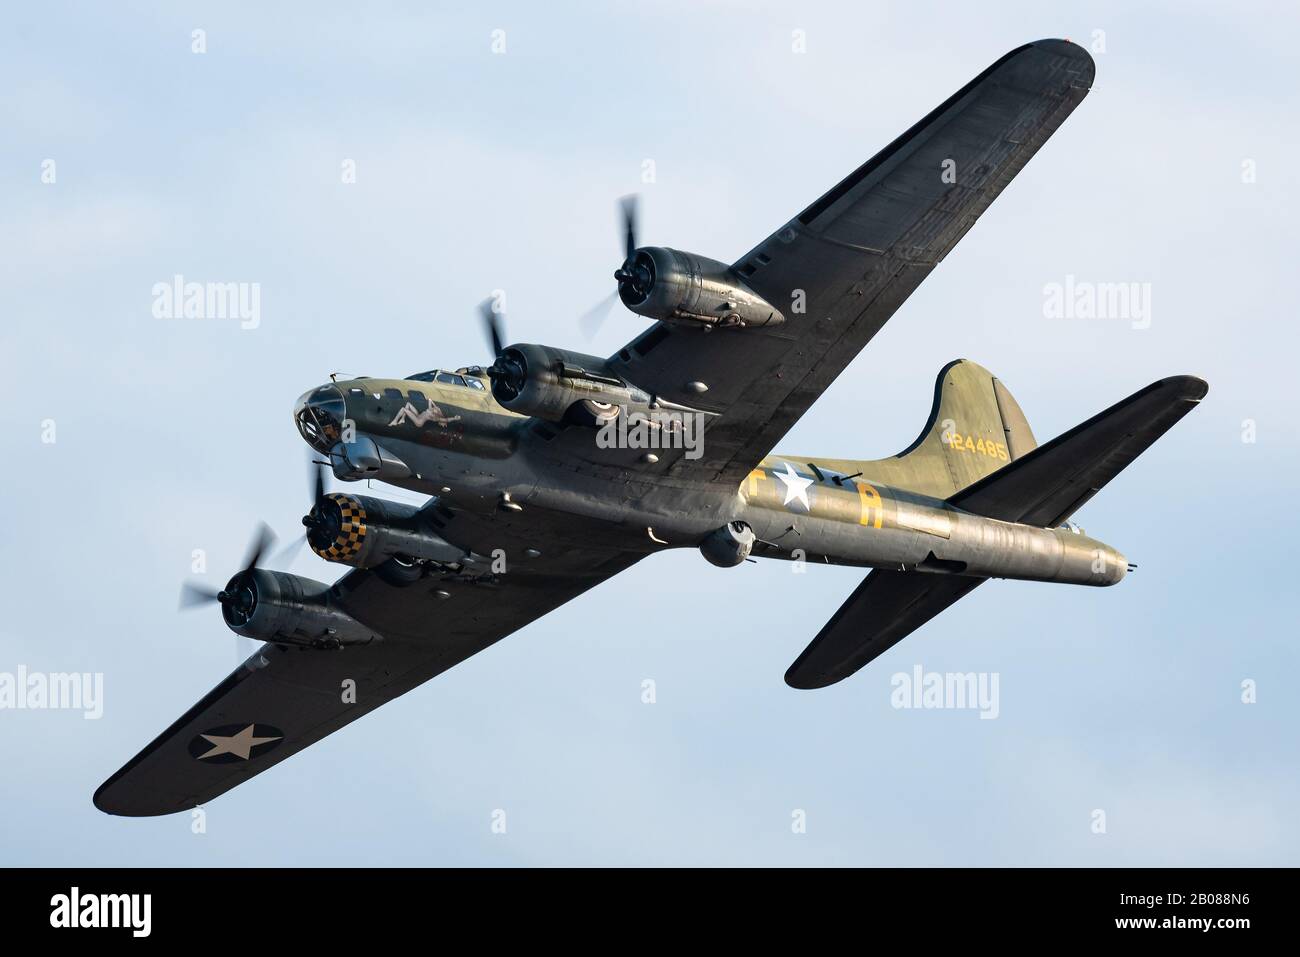 The beautiful Boeing B-17 Flying Fortress 'Sally B' heavy bomber developed in the 1930s for the United States Army Air Corps (USAAC). Stock Photo